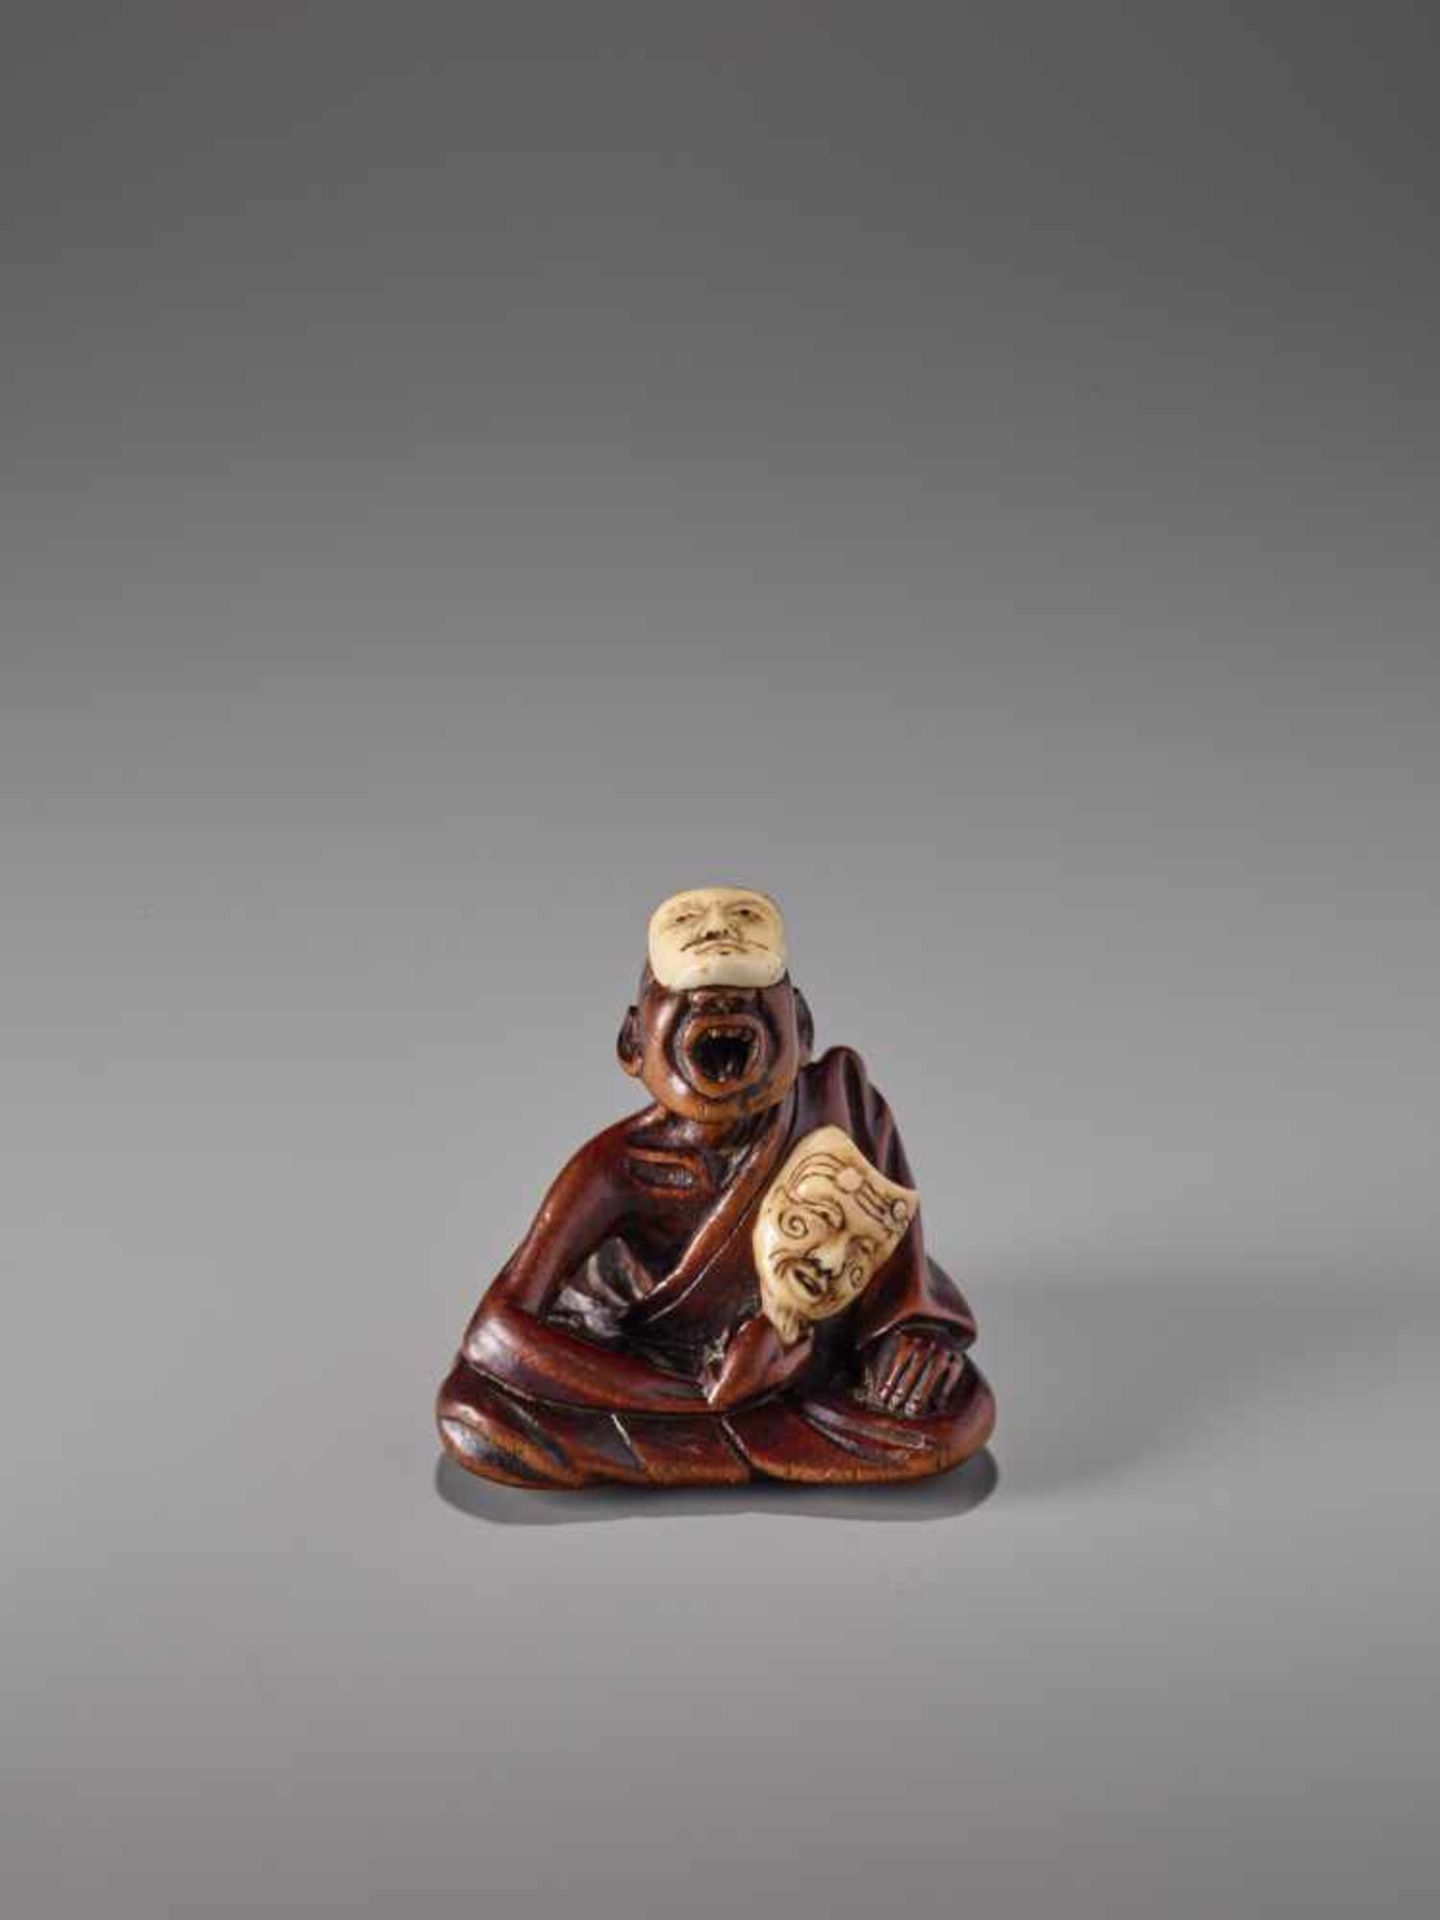 AN UNUSUAL WOOD AND IVORY NETSUKE OF A SNEEZER AS A NOH ACTOR BY HOKEIWood netsuke with